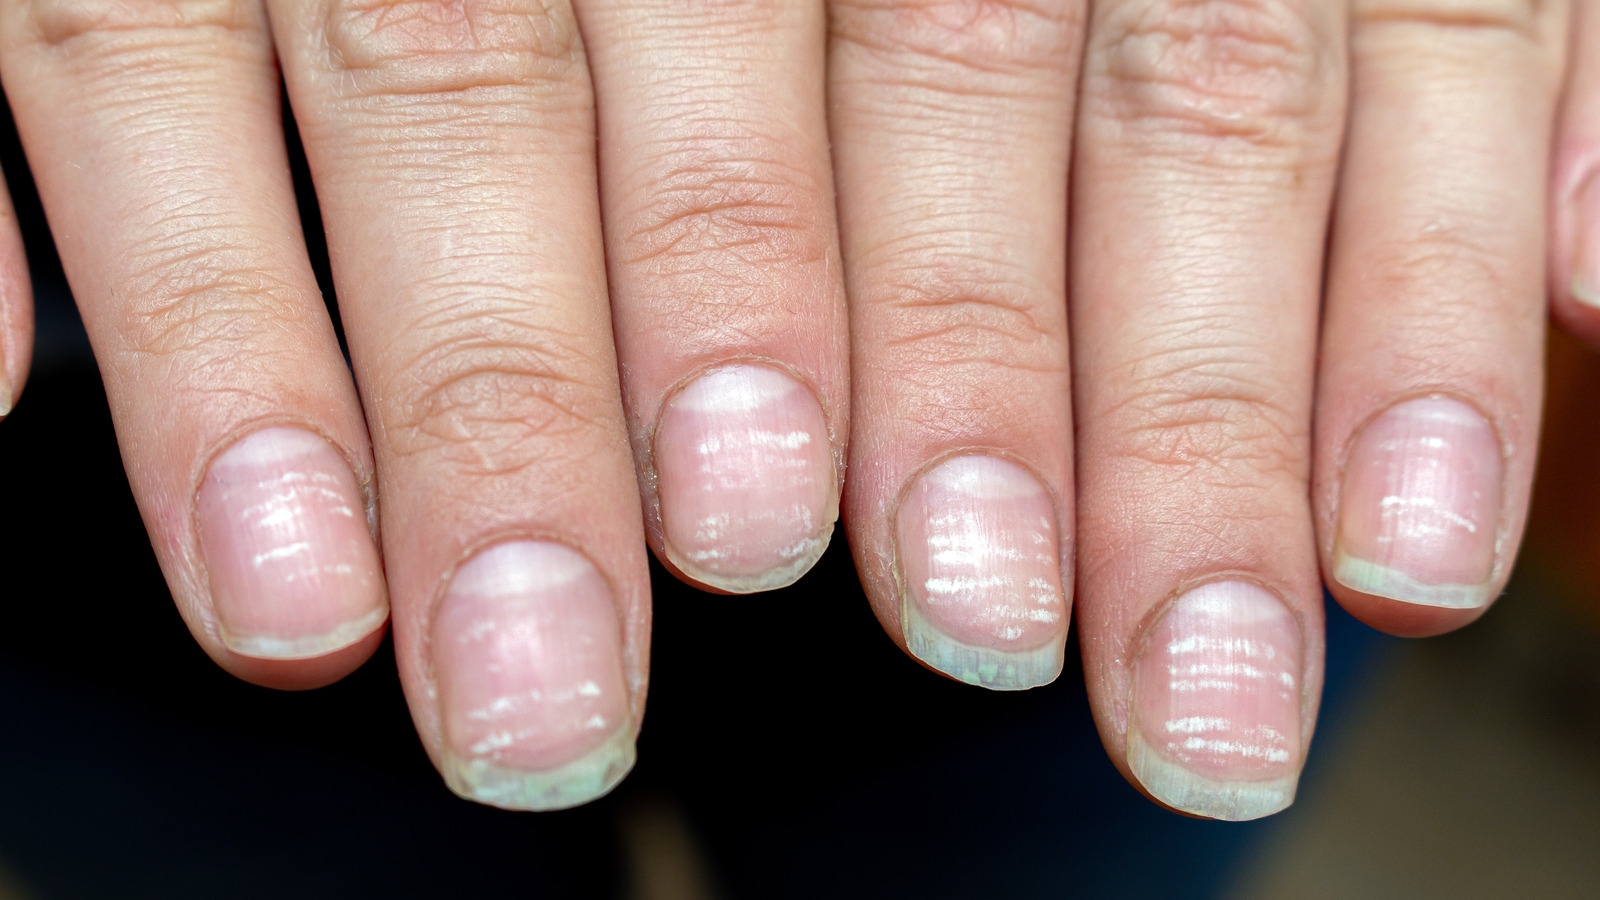 The Truth About 'Covid Nails'